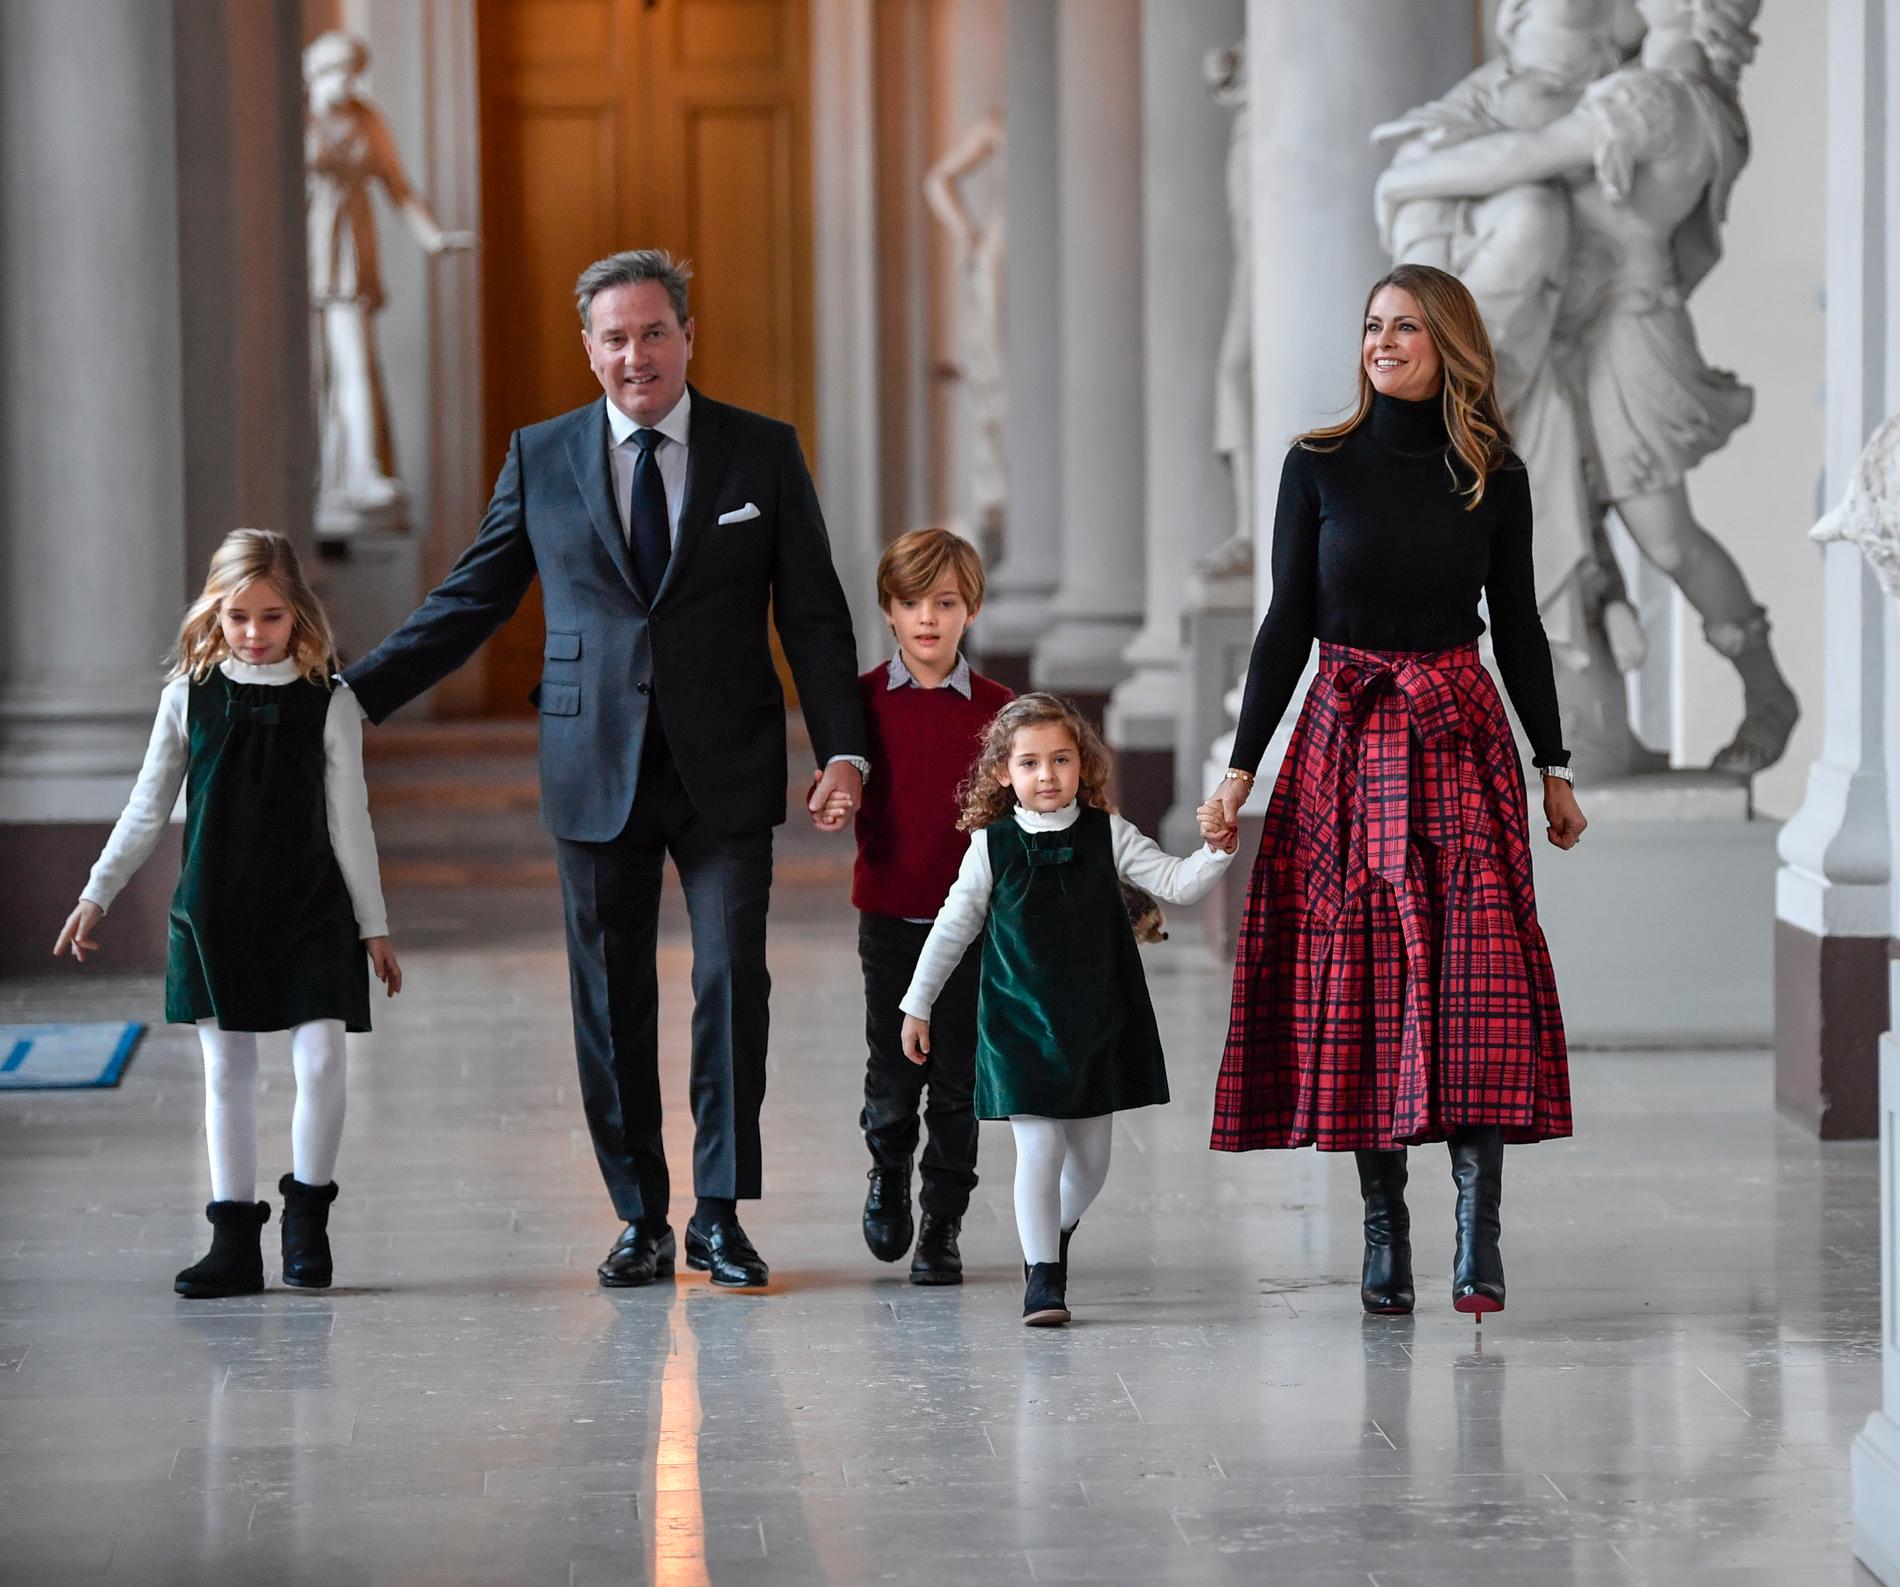 Princess Madeleine with a surprise visit – VG